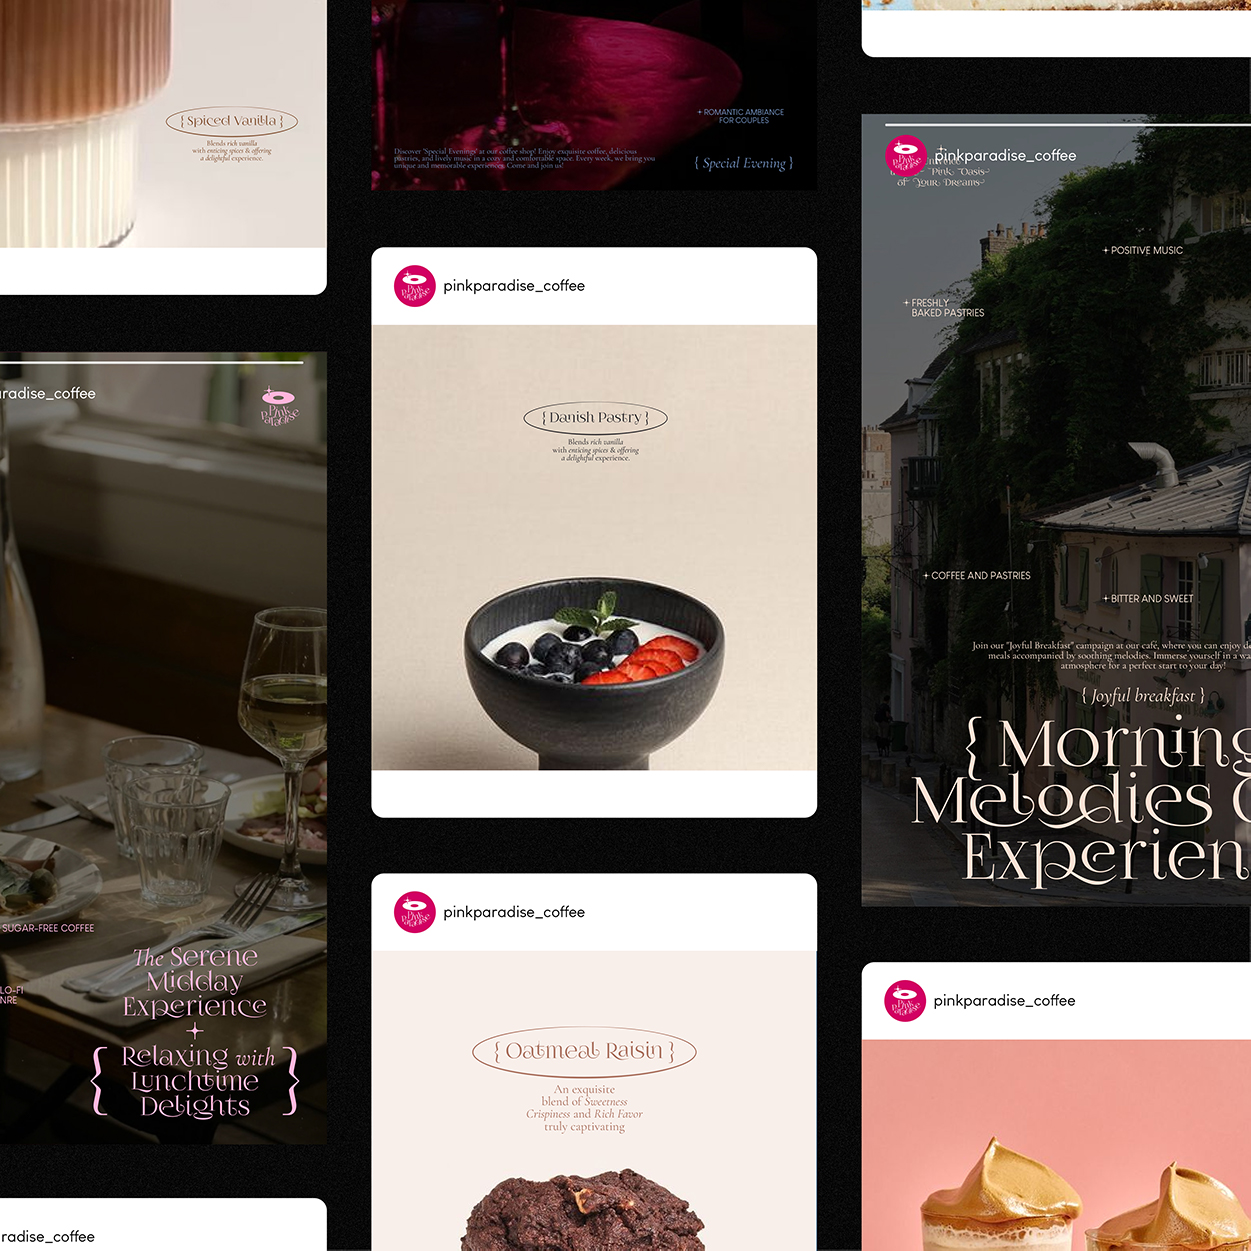 A Novelty Creative Agency Create Pink Paradise Coffee and Cakes ...